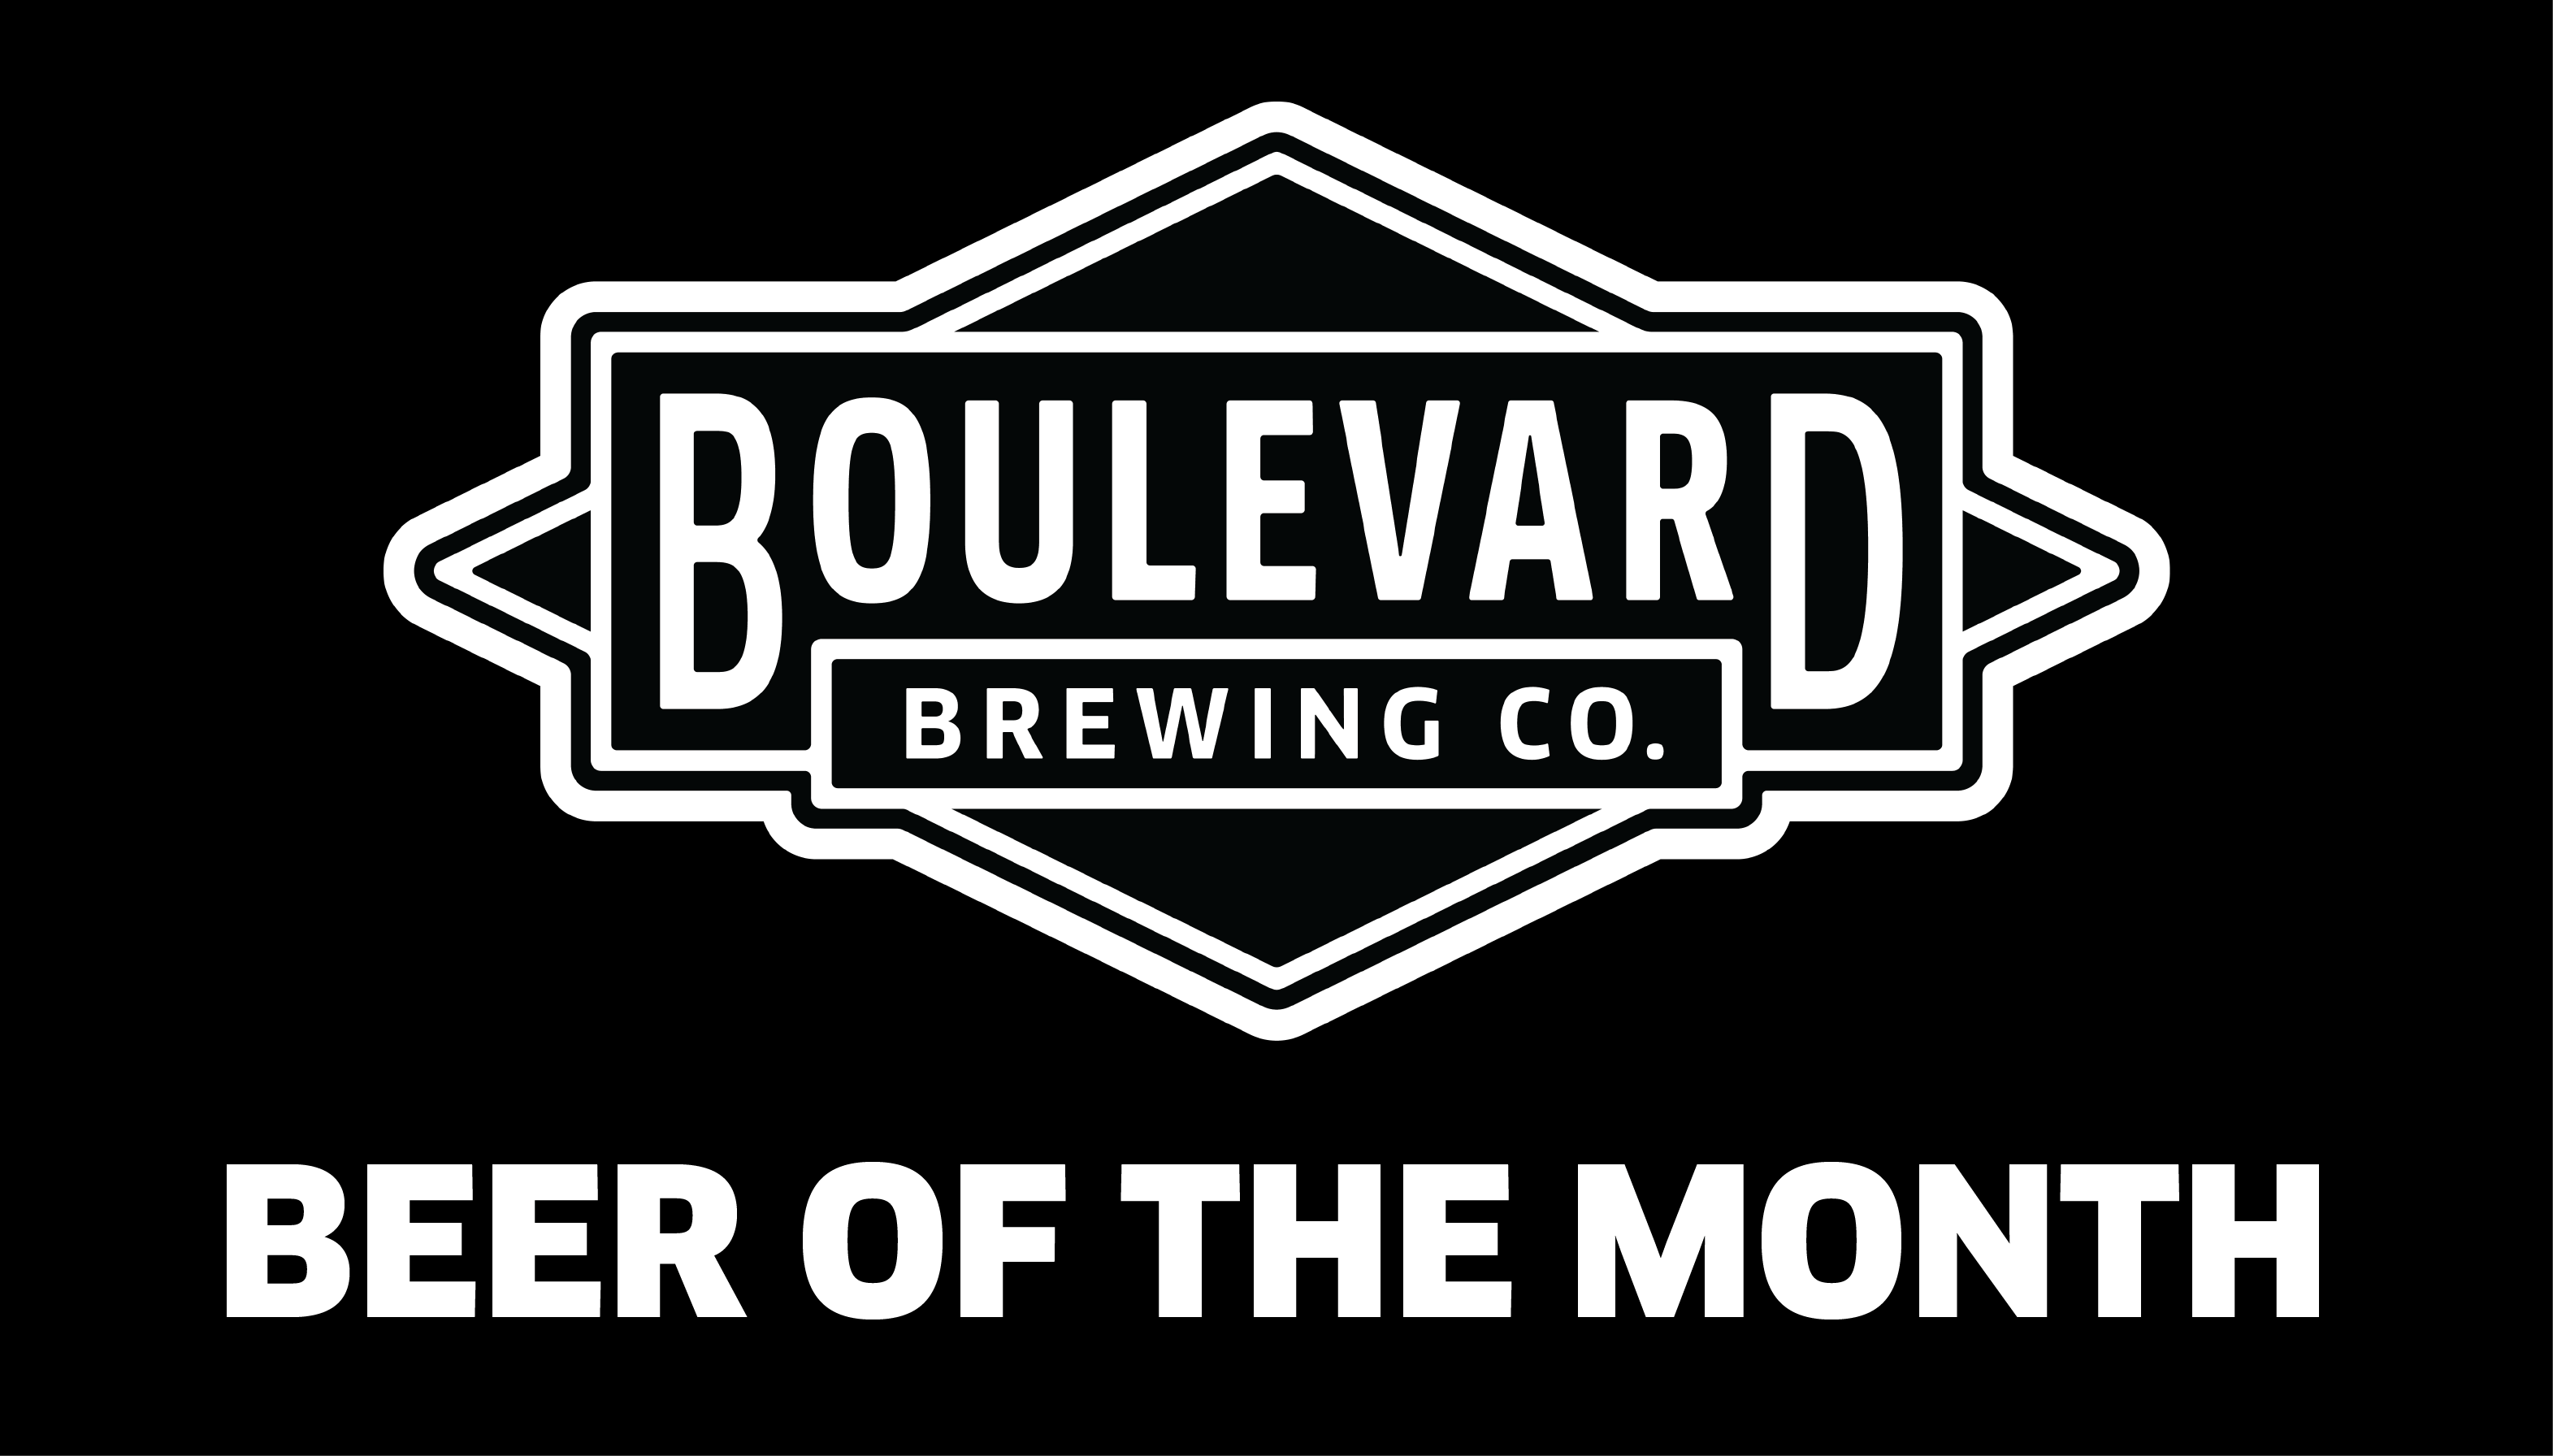 Blvd Beer Logo - Beer of the Month at Circle 7 Ranch. Boulevard Brewing Company